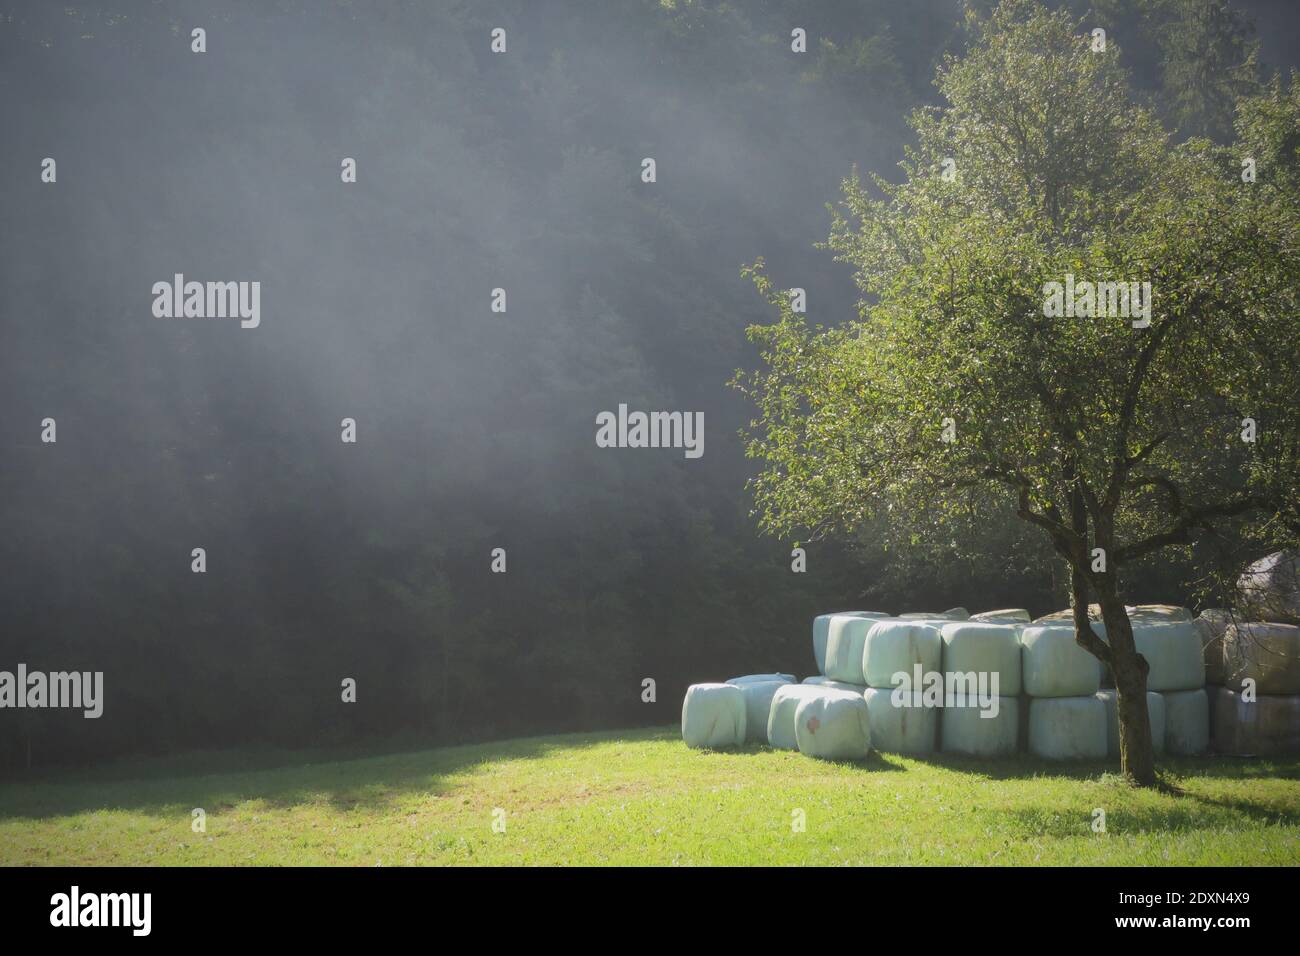 Stack Of Trees On Field Against Smoke Stock Photo